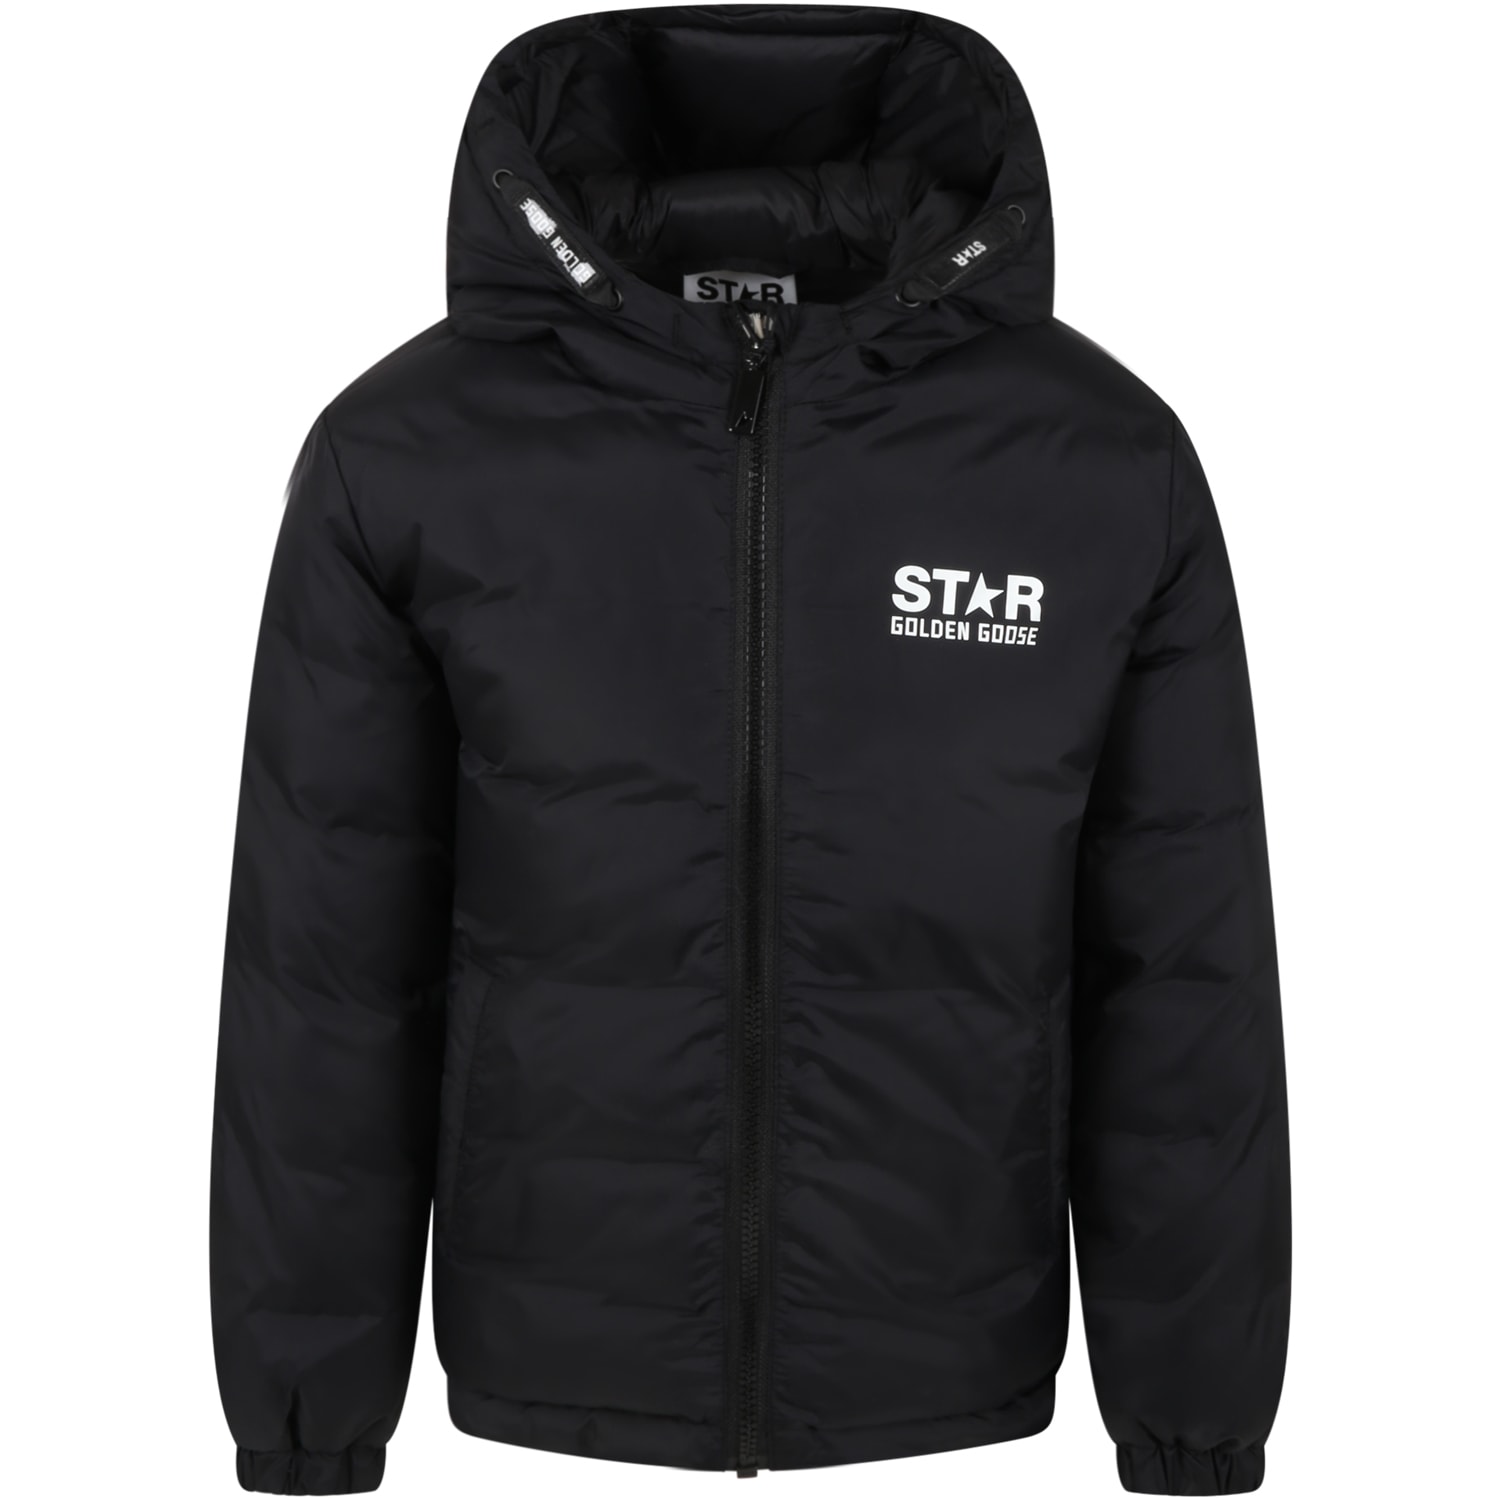 Golden Goose Black Jacket For Boy With White Logo And Star